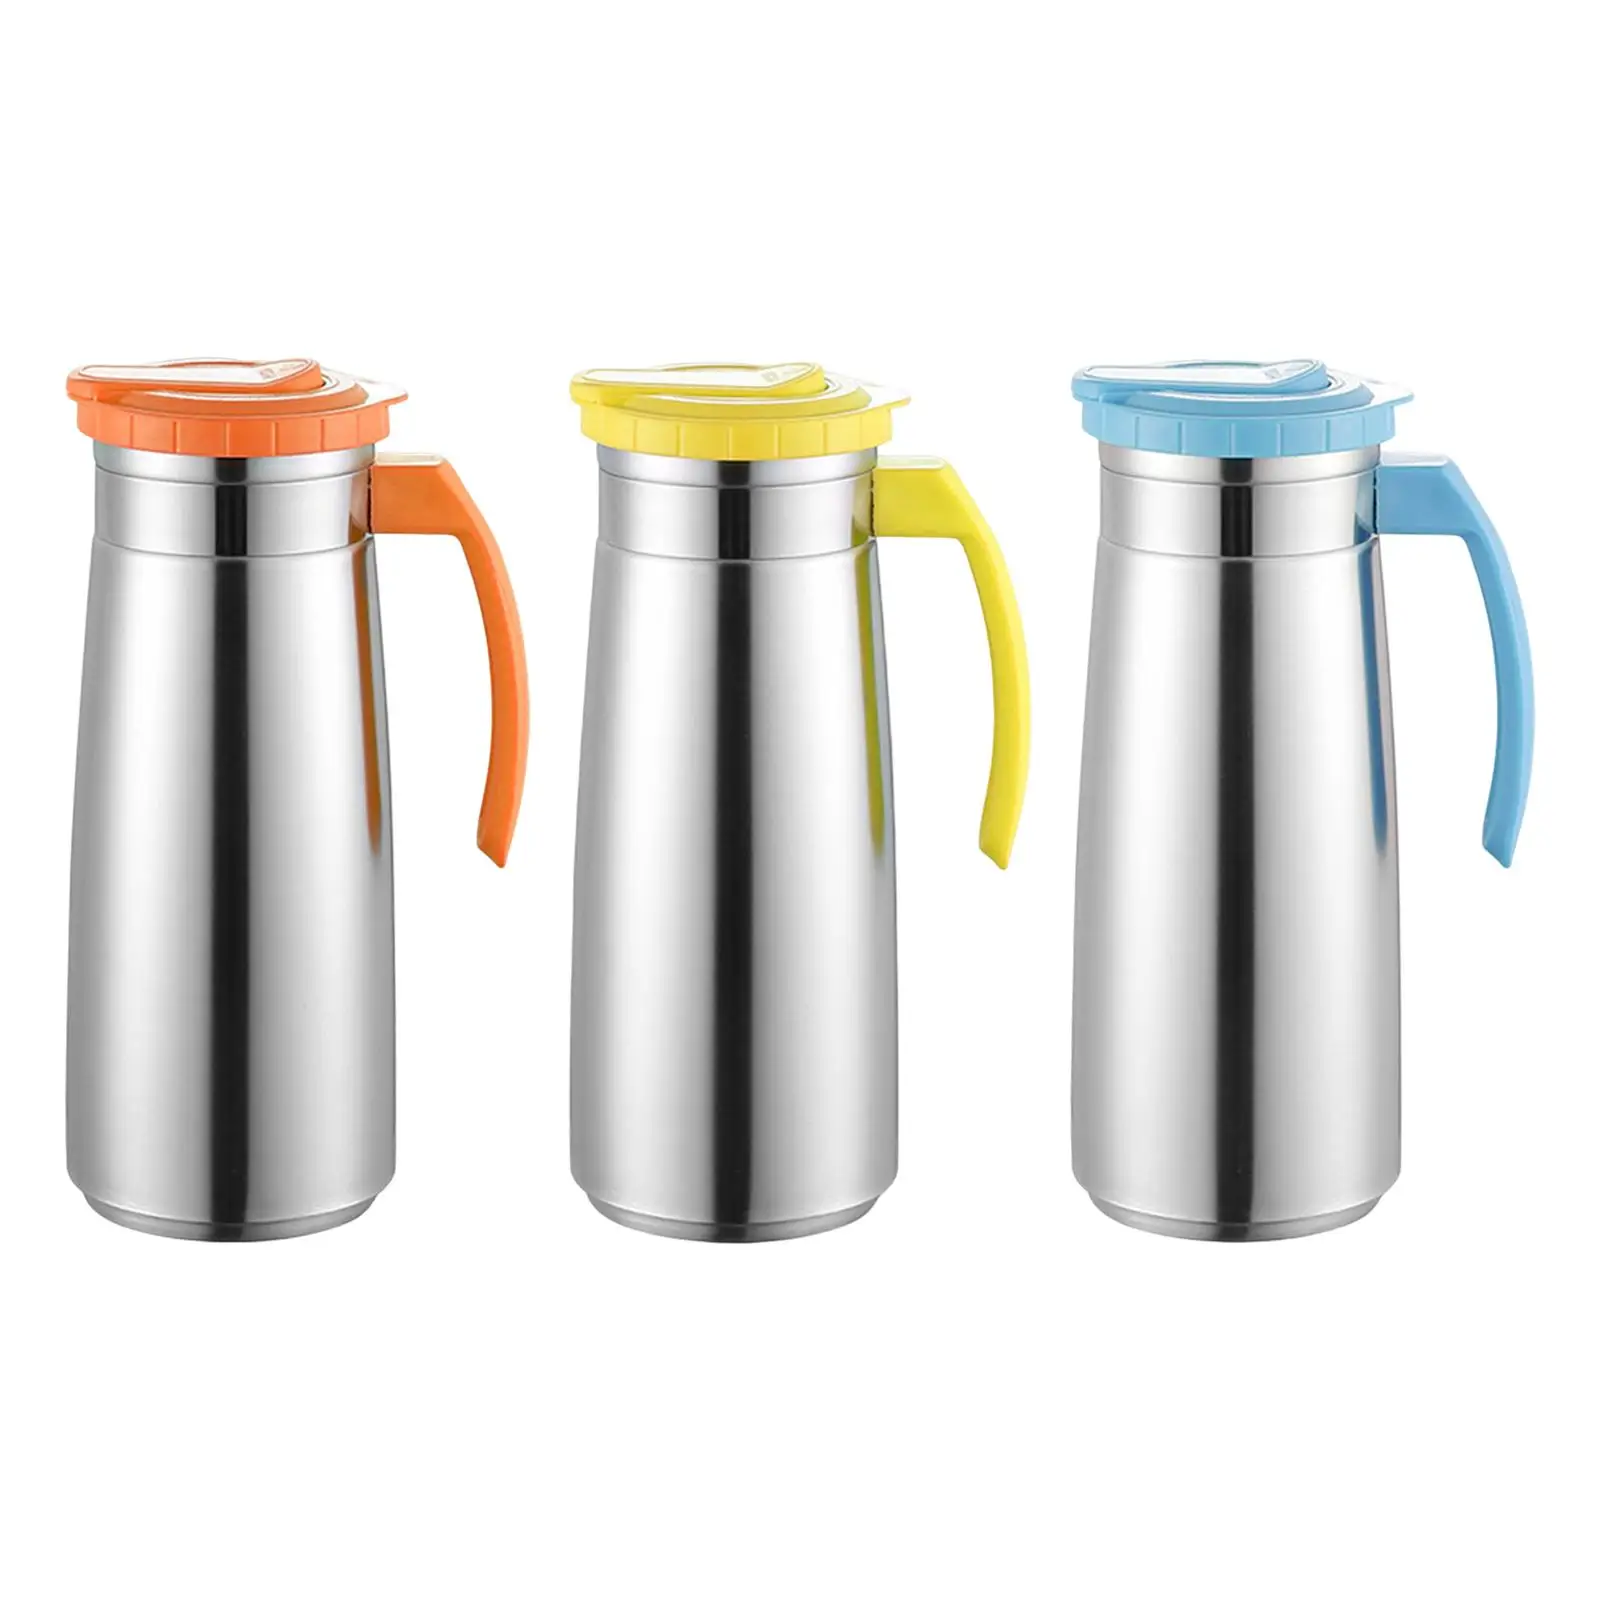 Stainless Steel Jug Carafes Sealed Lid Teapot Kettle Cold Water Kettle for Barbecue Fridge Picnic Holiday Home